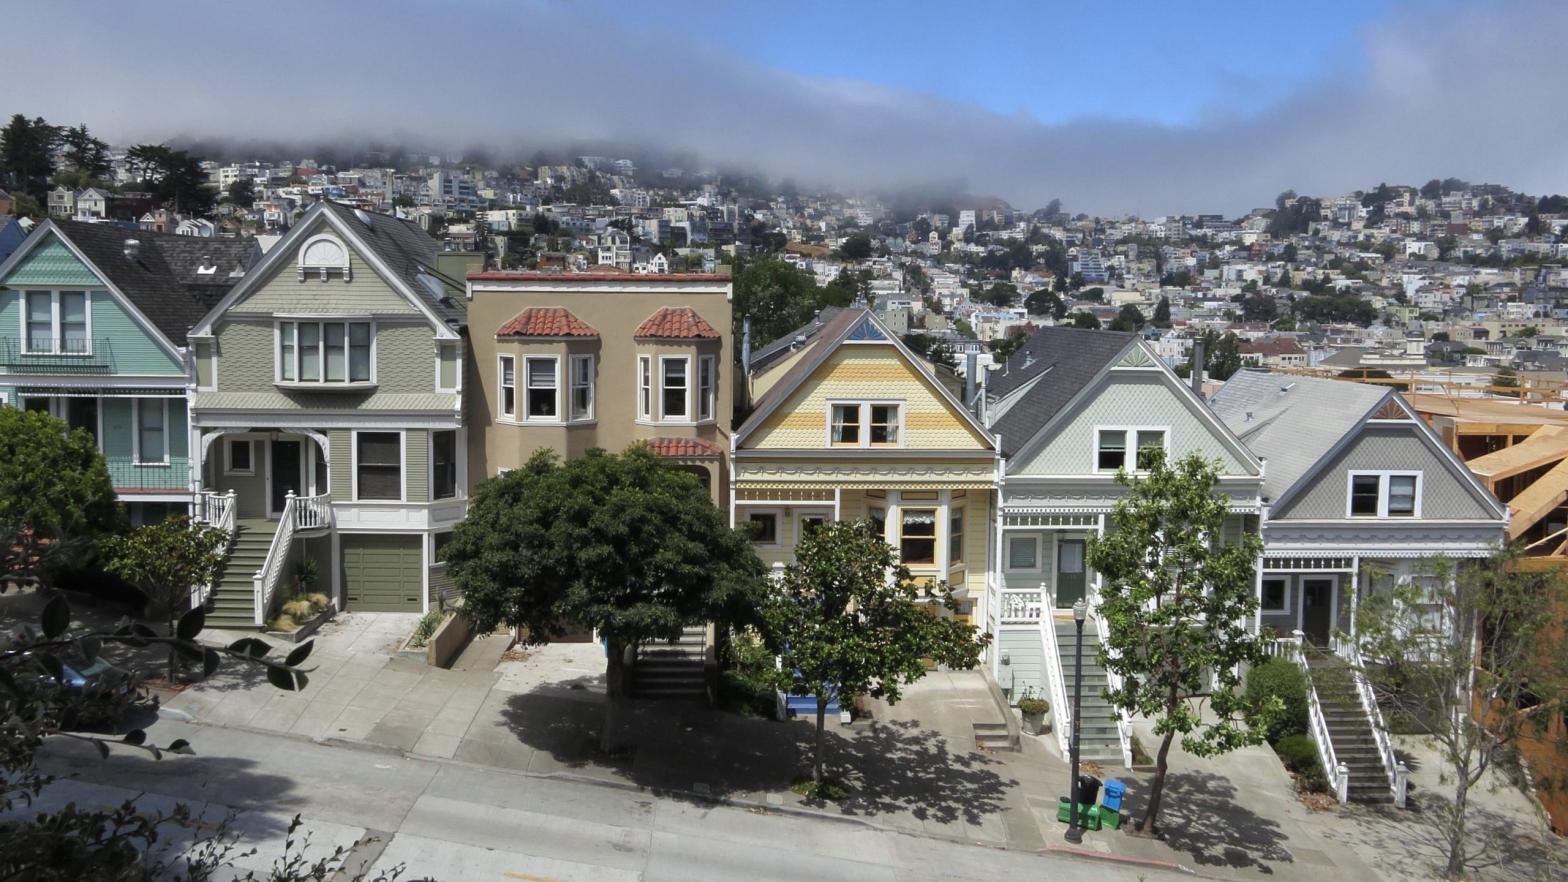 Residential houses line a street in Mission near Delores Park as typical San Francisco summer fog rolls in. (Photo: Sean Gallup, Getty Images)